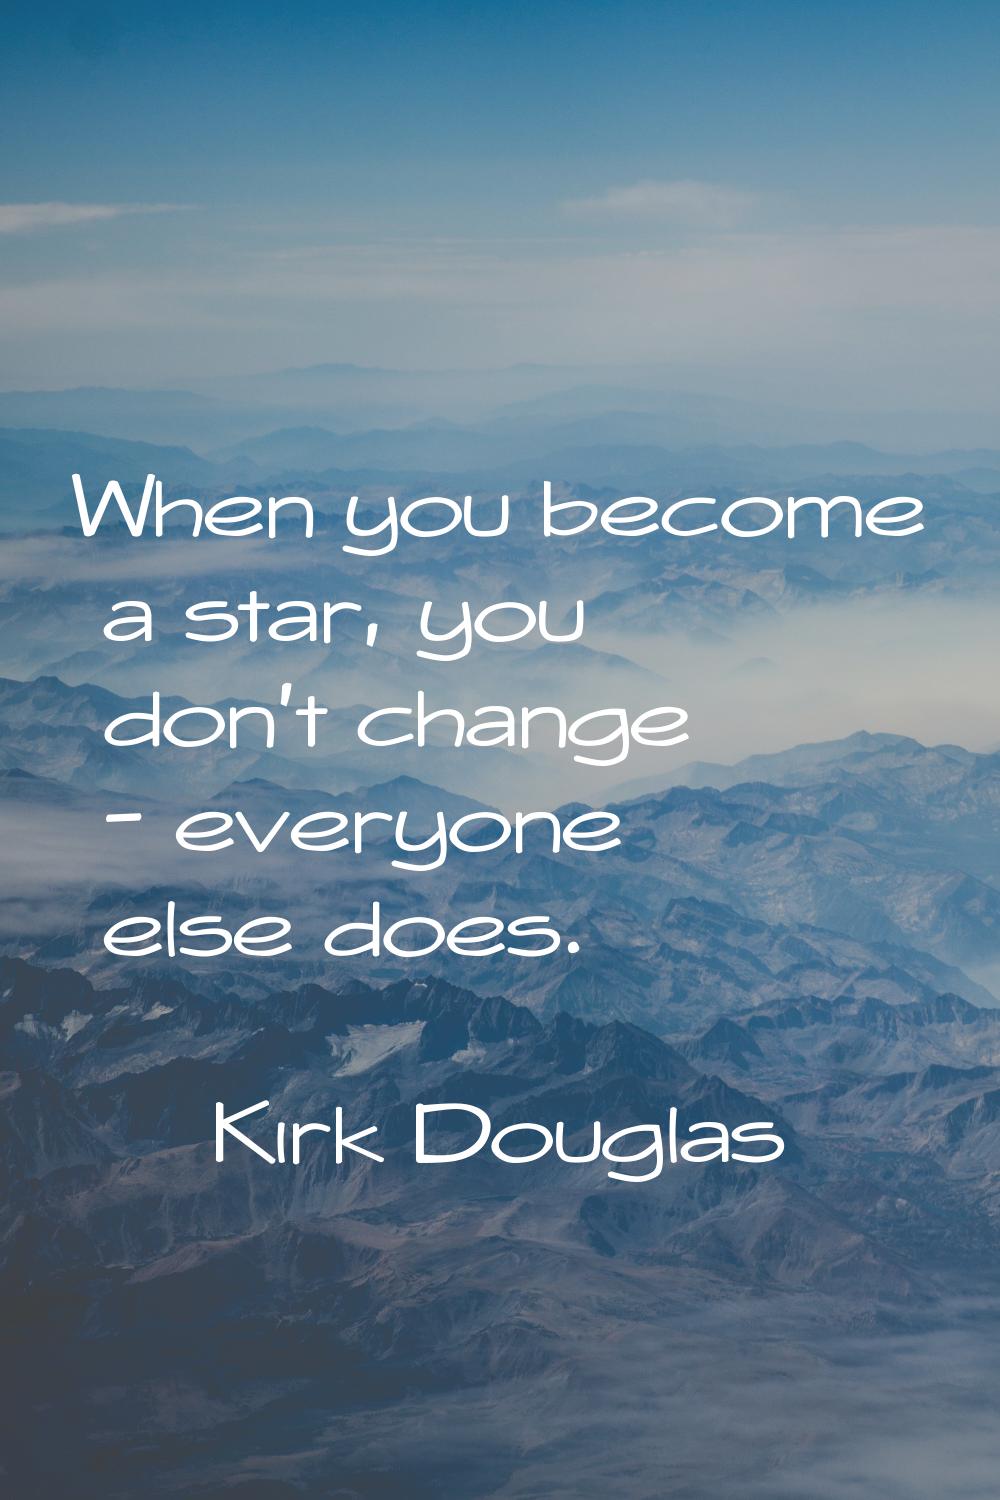 When you become a star, you don't change - everyone else does.